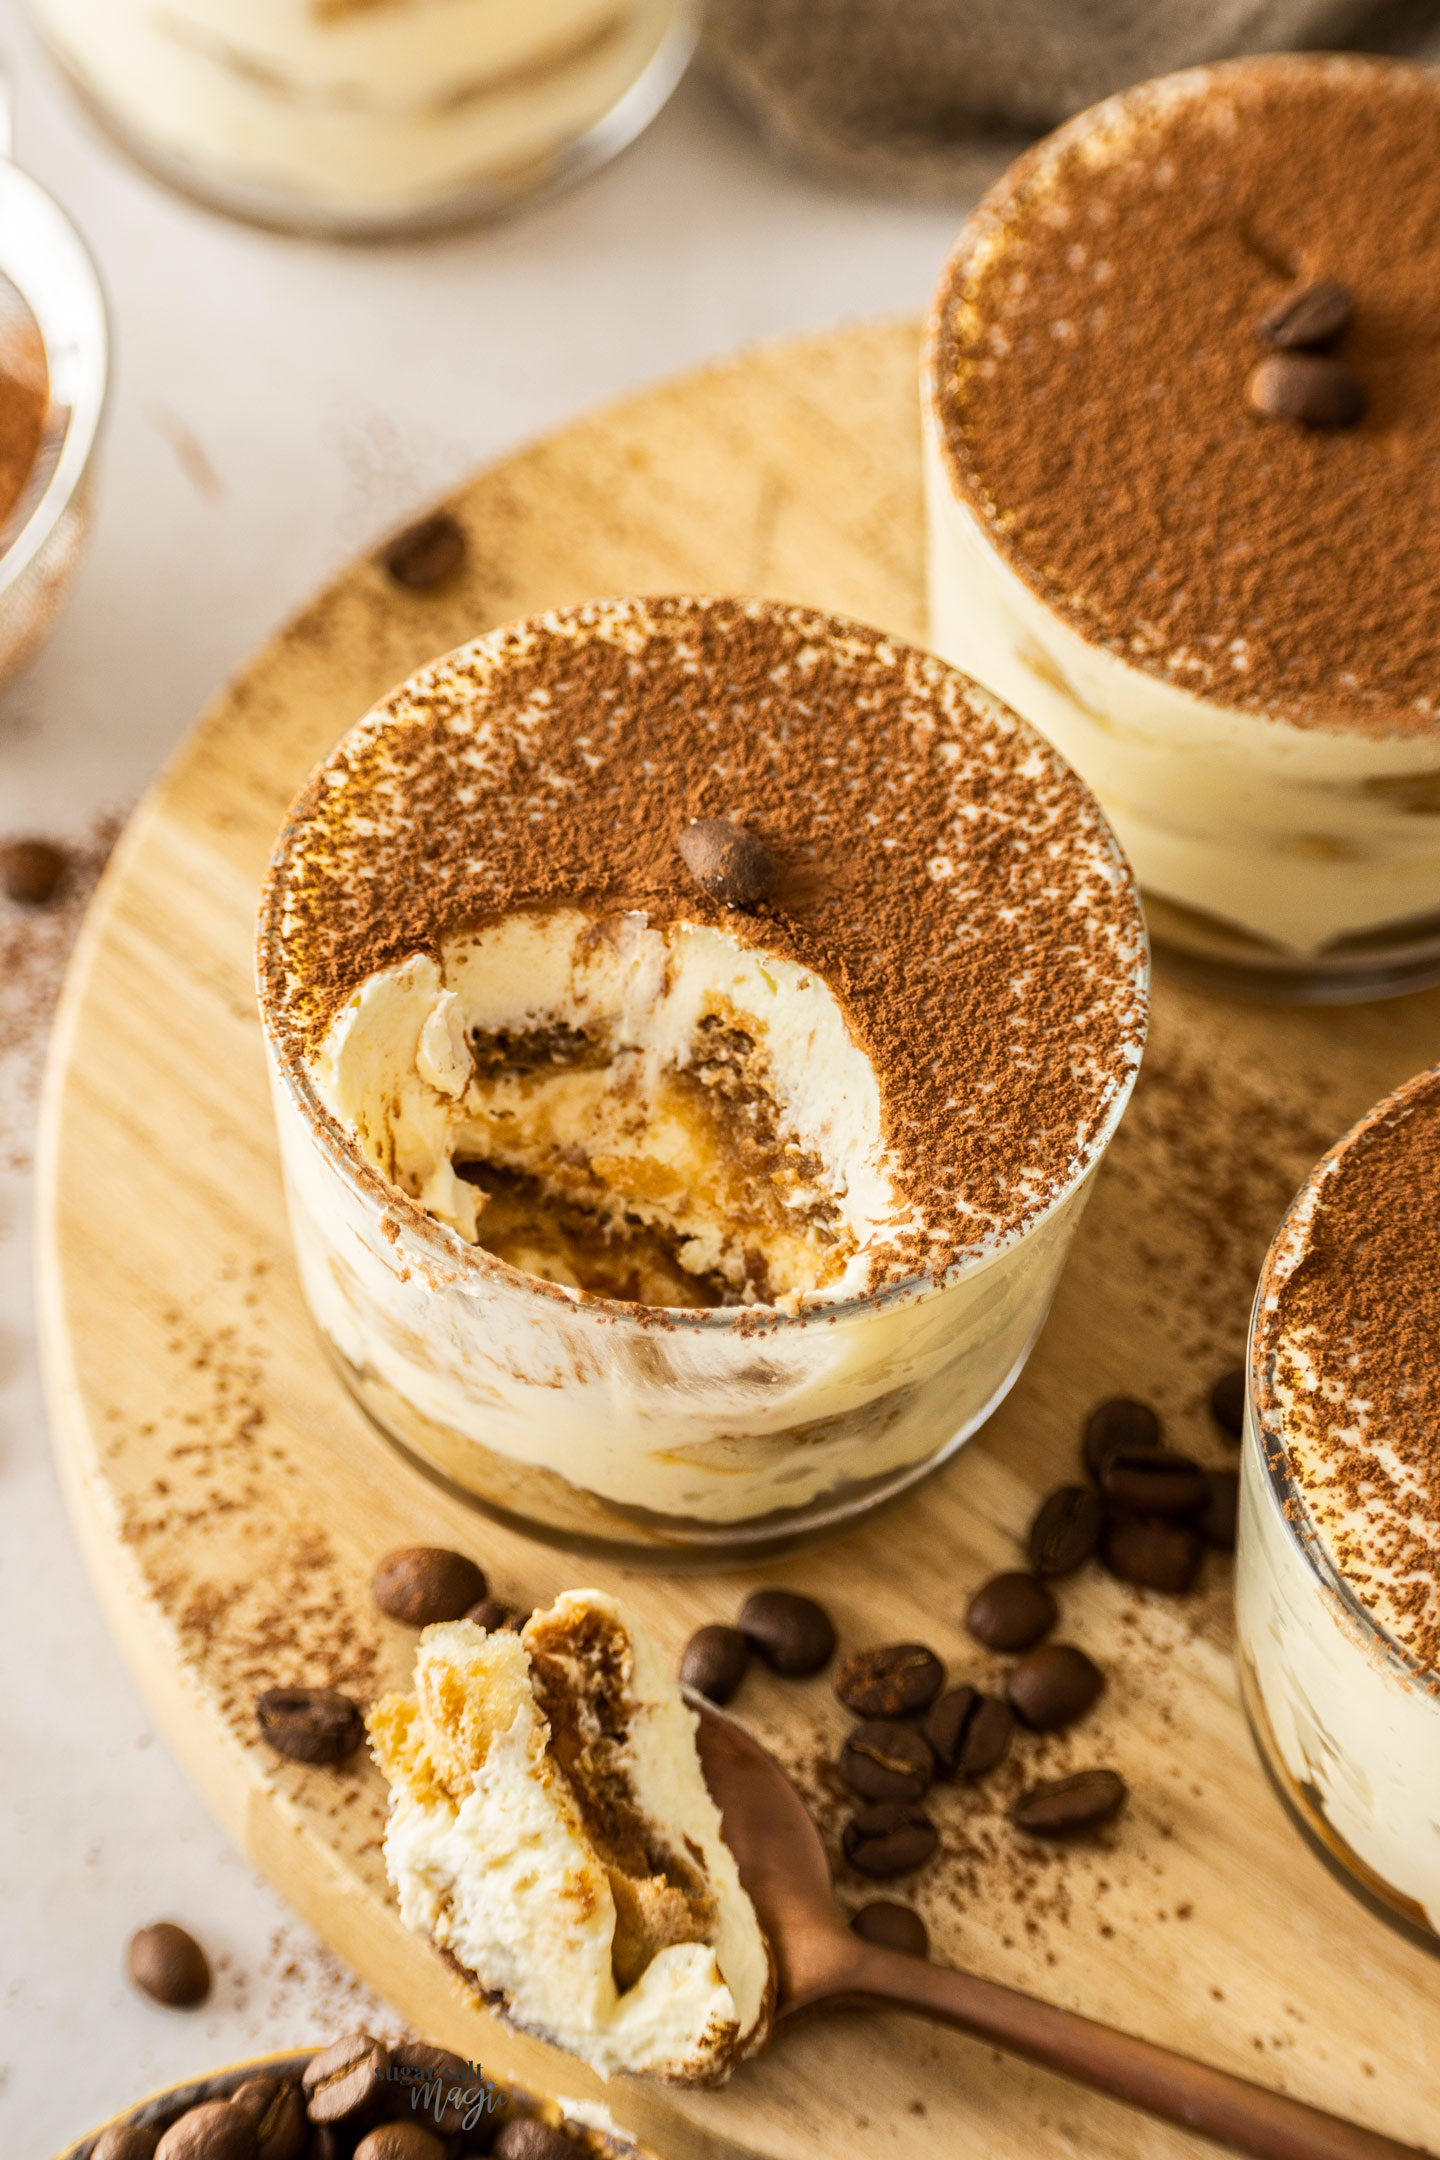 Looking into a tiramisu cup to show the layers.